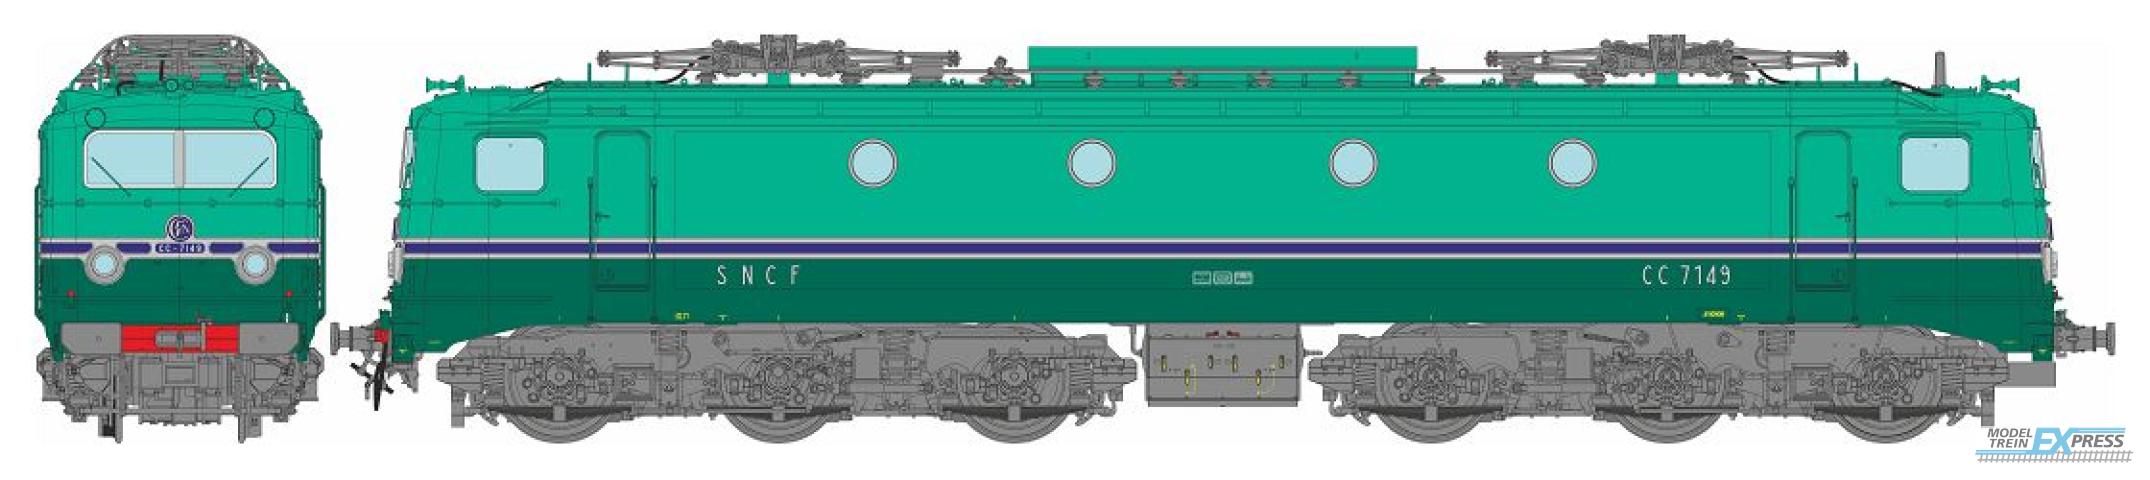 REE models MB-194S CC 7149, AVIGNON, removed skirts, closed top lights, white markings Era.IV - DCC SOUND